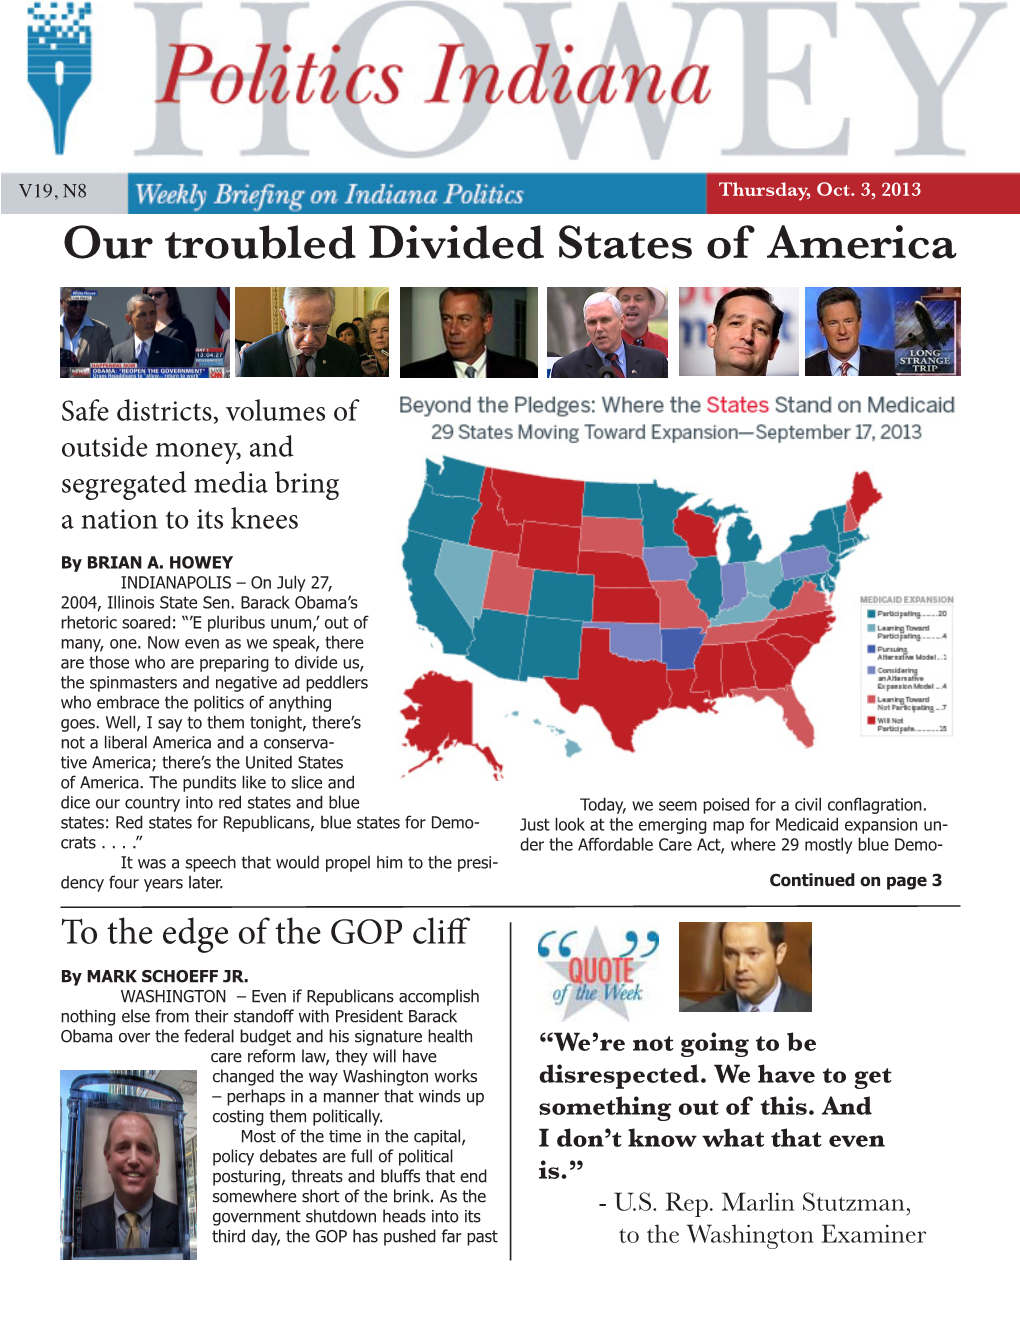 Our Troubled Divided States of America